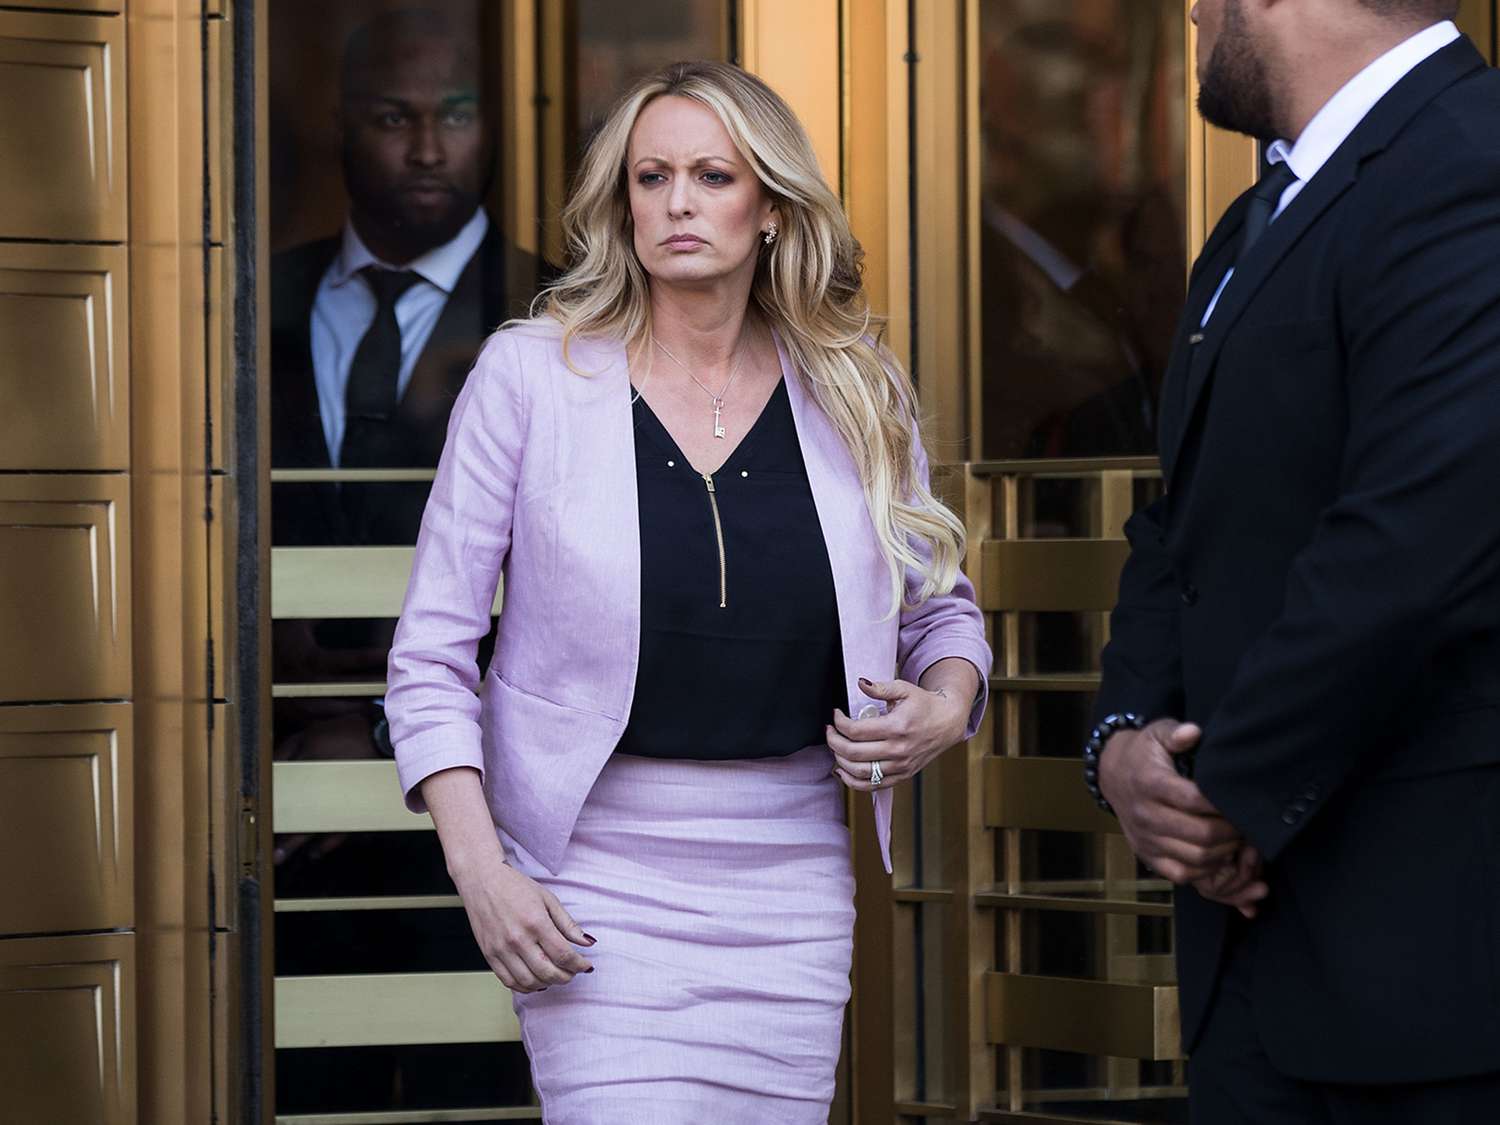 Stormy Daniels exits the United States District Court Southern District of New York for a hearing related to Michael Cohen on April 16, 2018 in New York City. 